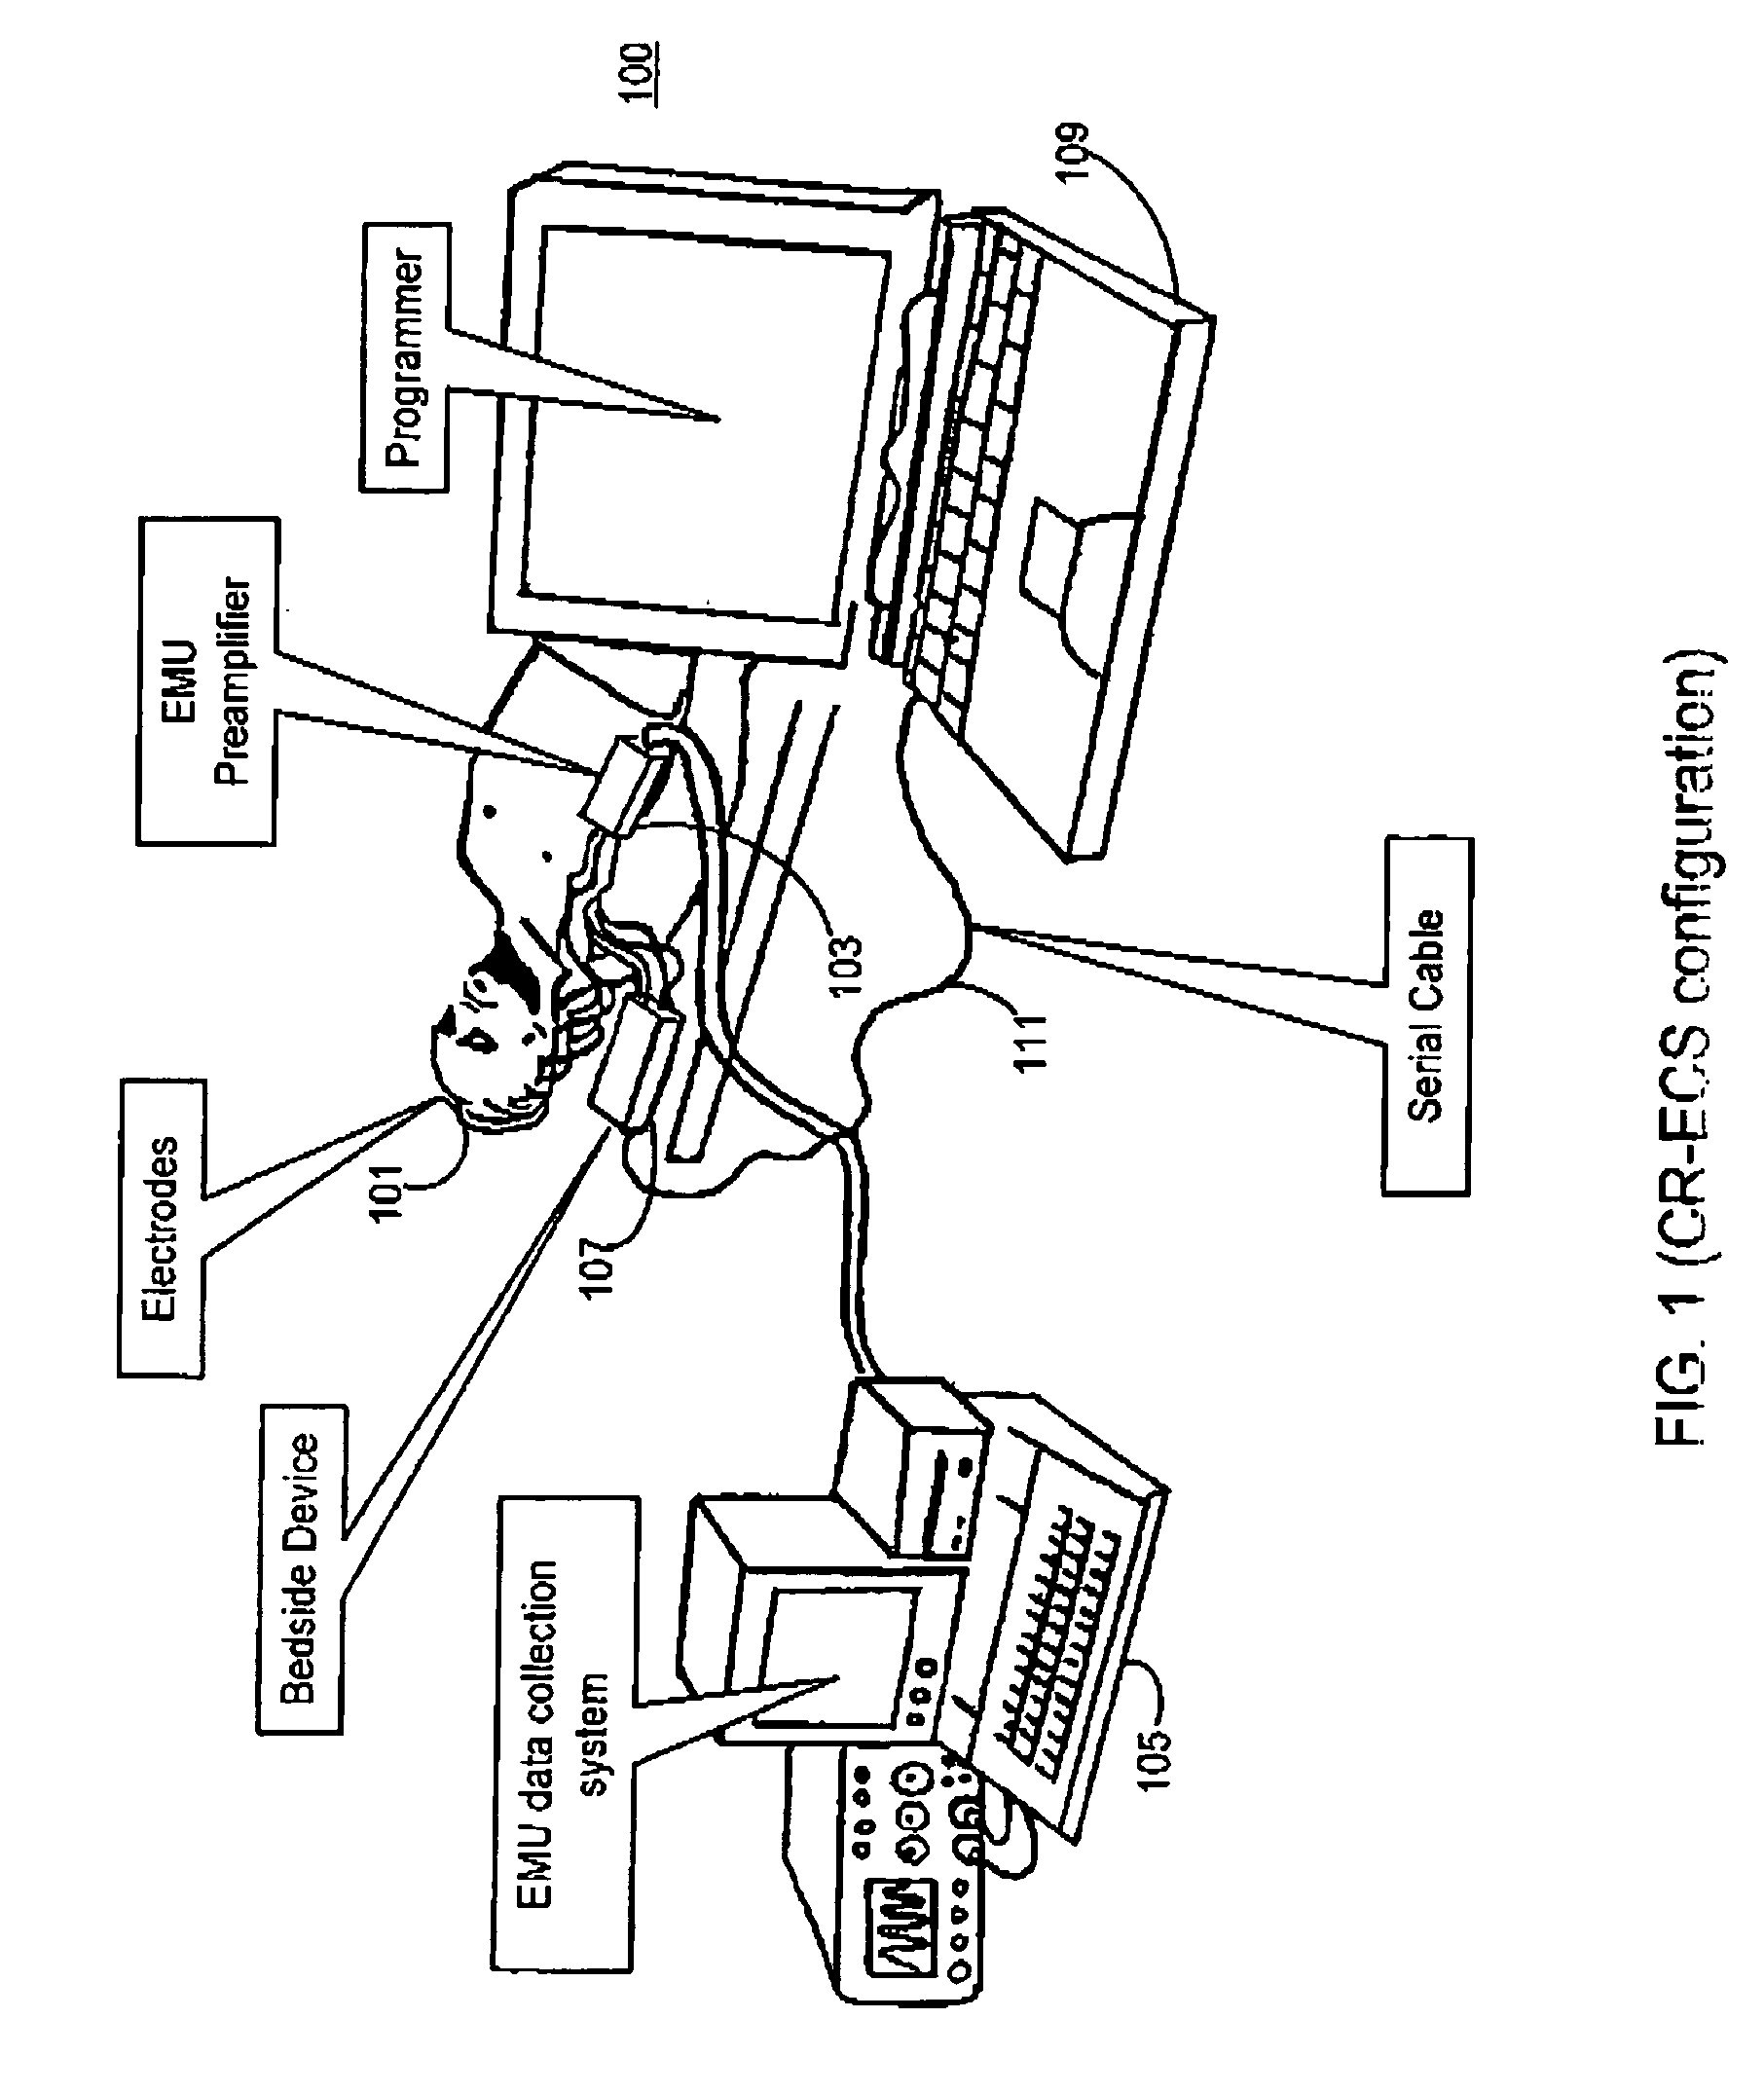 Synchronization and calibration of clocks for a medical device and calibrated clock